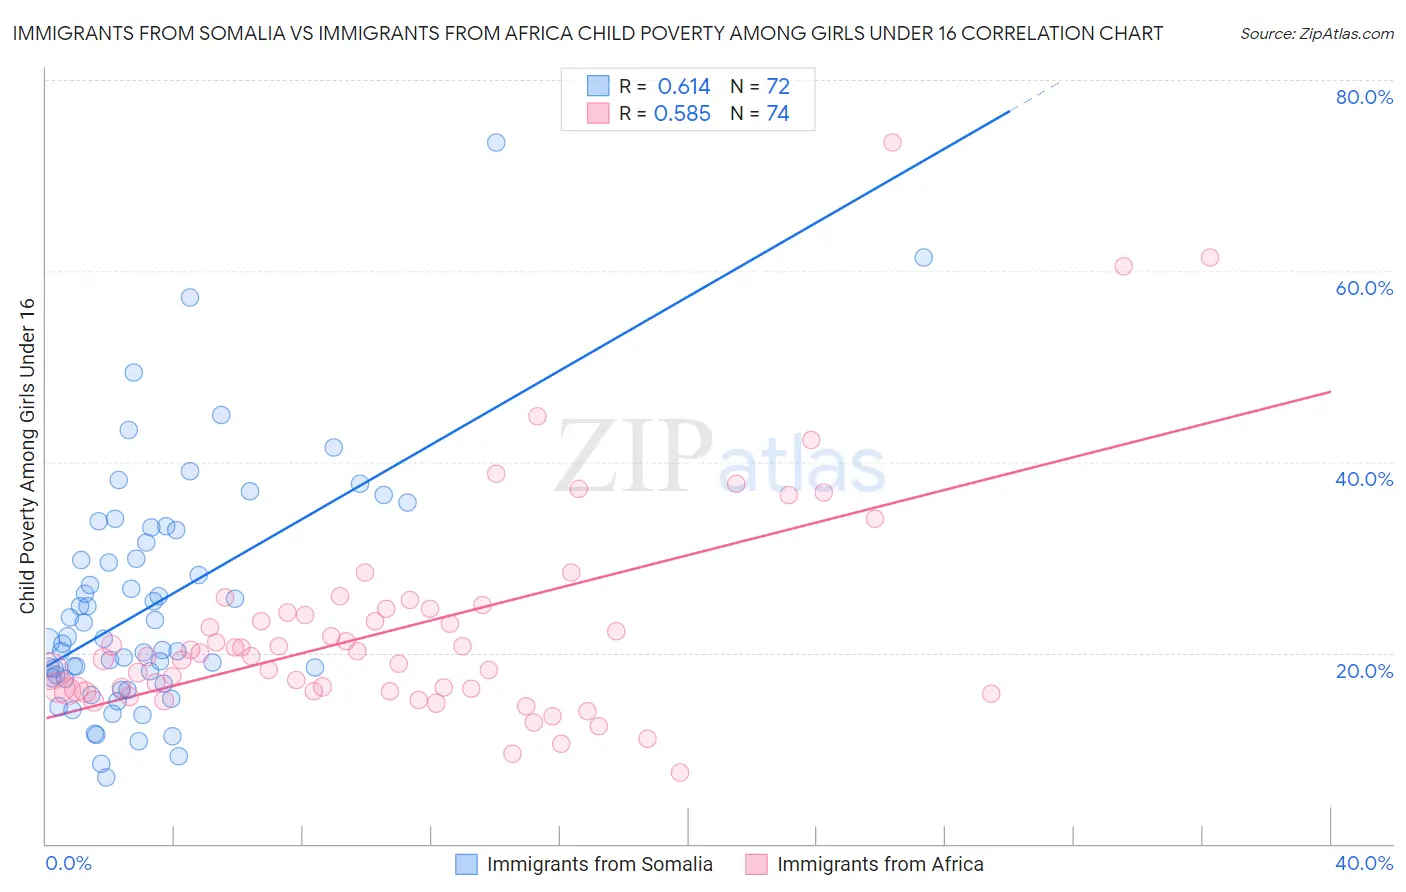 Immigrants from Somalia vs Immigrants from Africa Child Poverty Among Girls Under 16